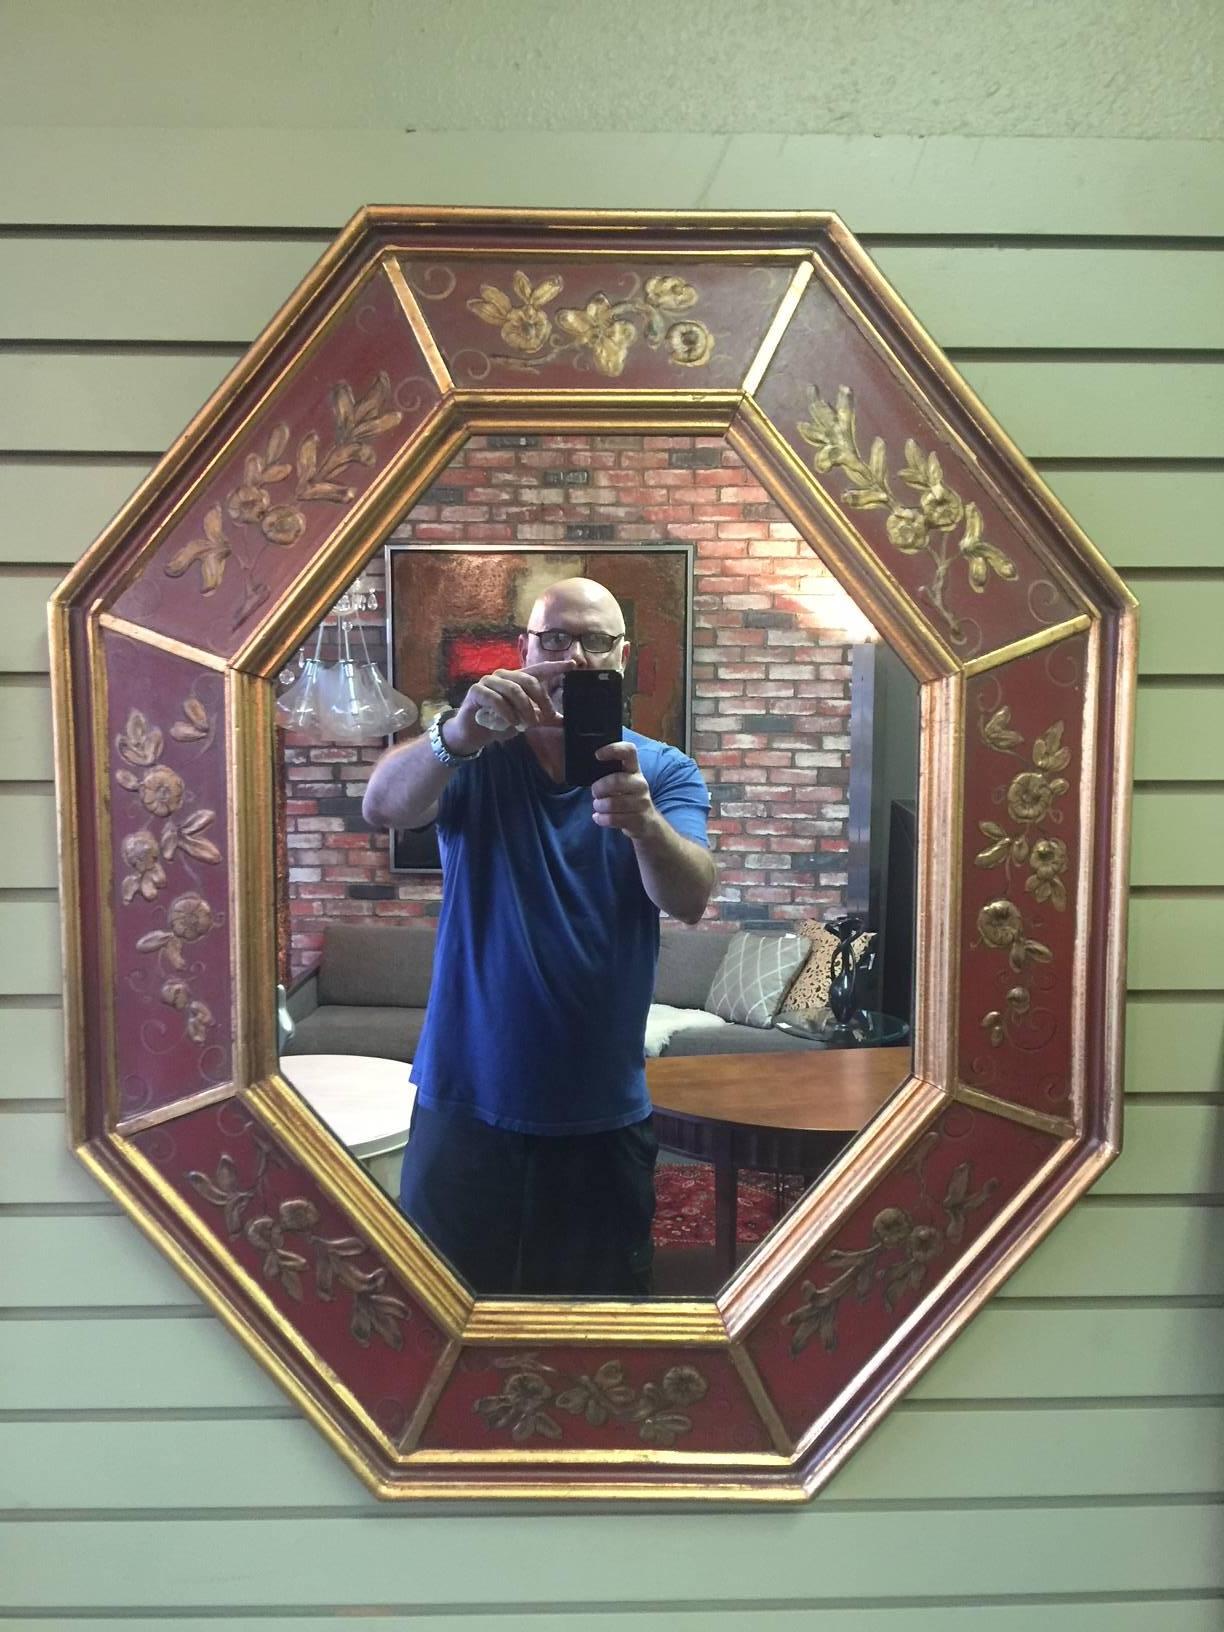 Inviting midcentury hand-painted gold leaf octagonal mirror in Chinese red by La Barge of Italy, circa 1960s. The mirror measures 35.5 x 29.5 and is in excellent vintage condition retaining its original tag.